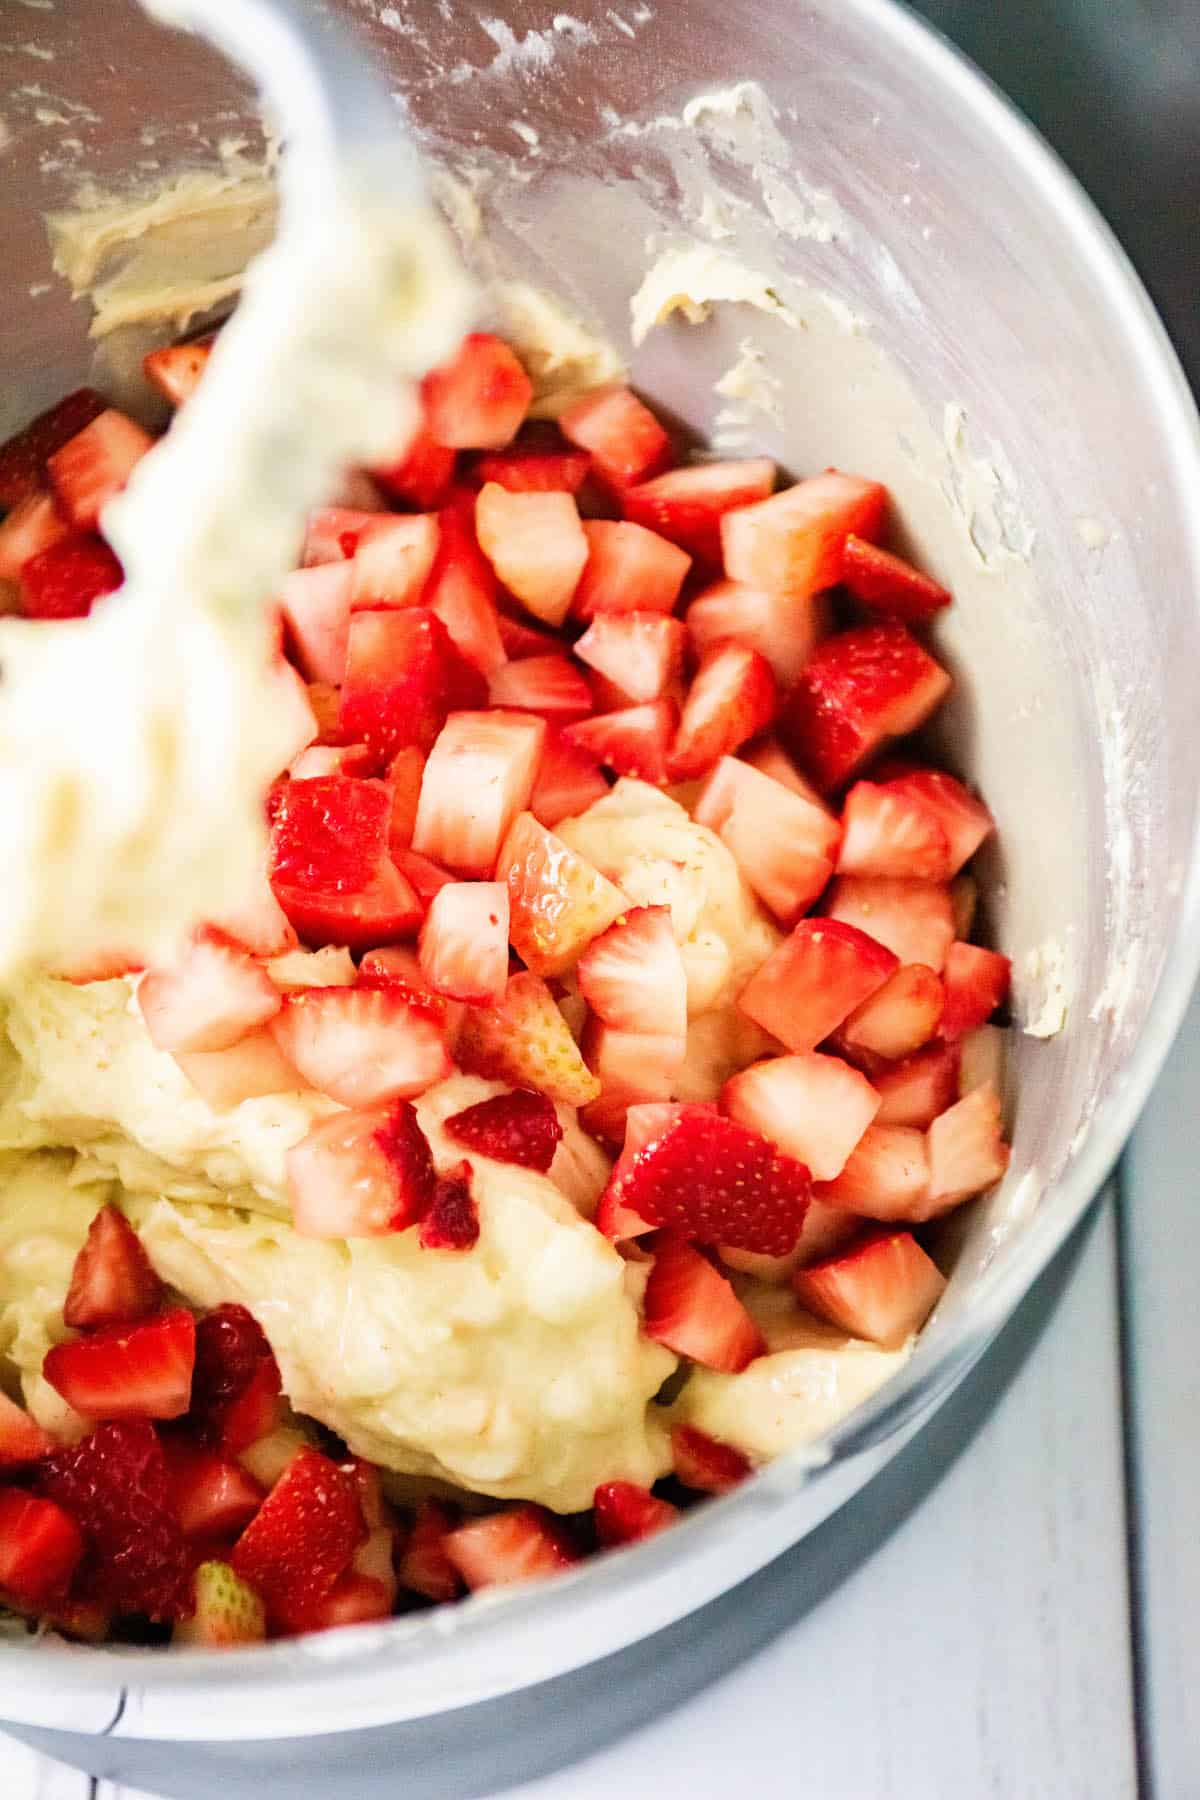 Strawberries in the batter for cookies.